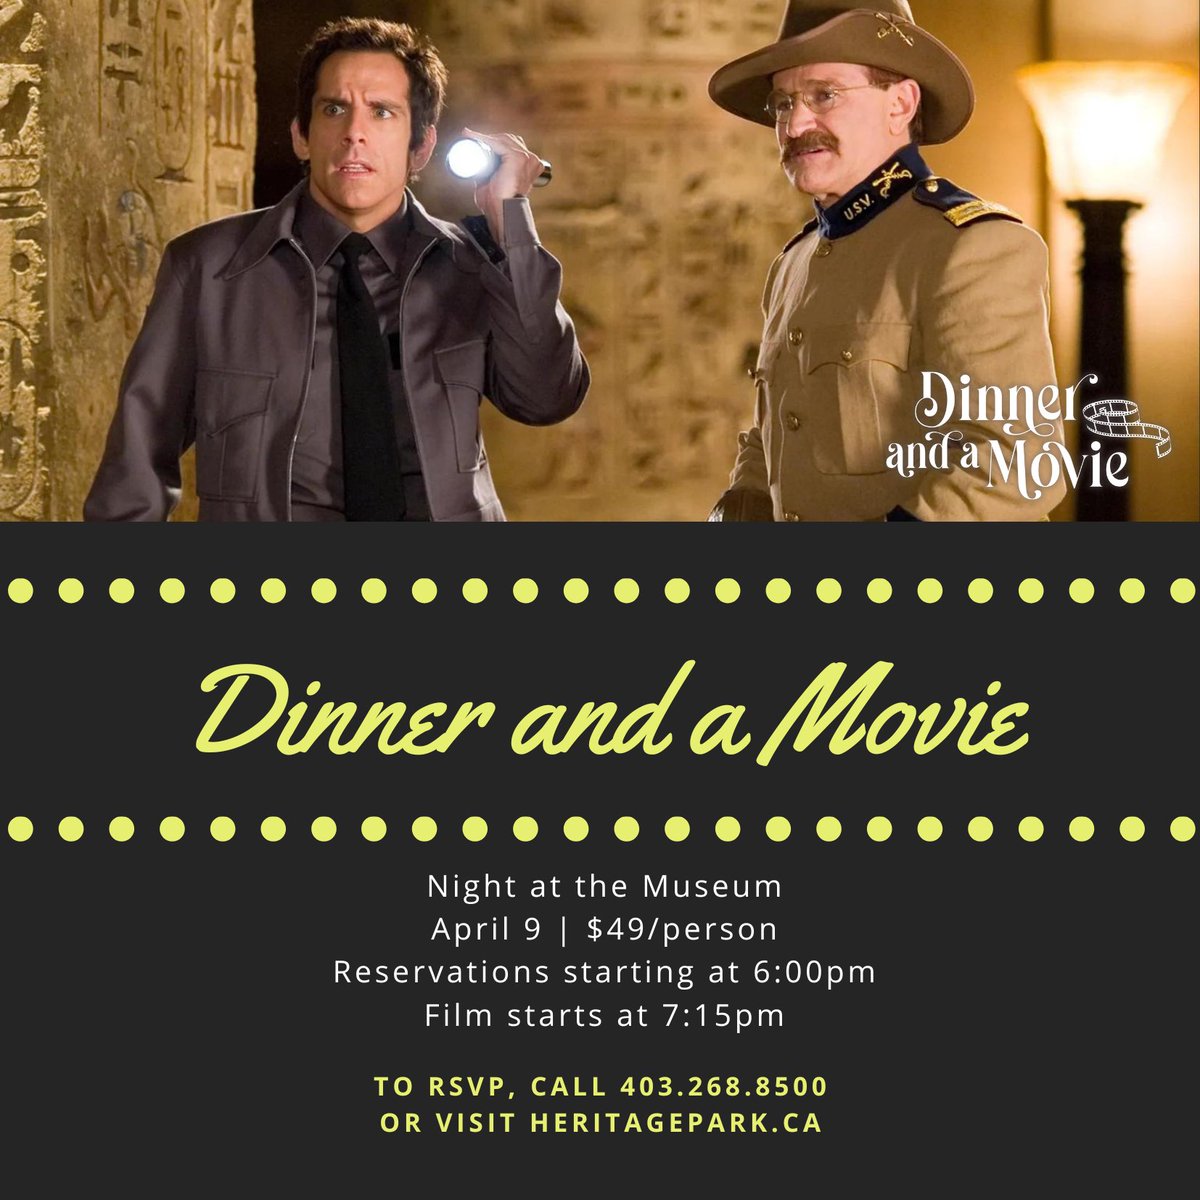 Dine among antique cars at Gasoline Alley Museum. While our cars won't come to life, we promise a charming, nostalgic evening! Enjoy a three-course meal, popcorn, a drink, and a screening of 'Night at the Museum' on our high-def screen. Visit bit.ly/3upfjtS